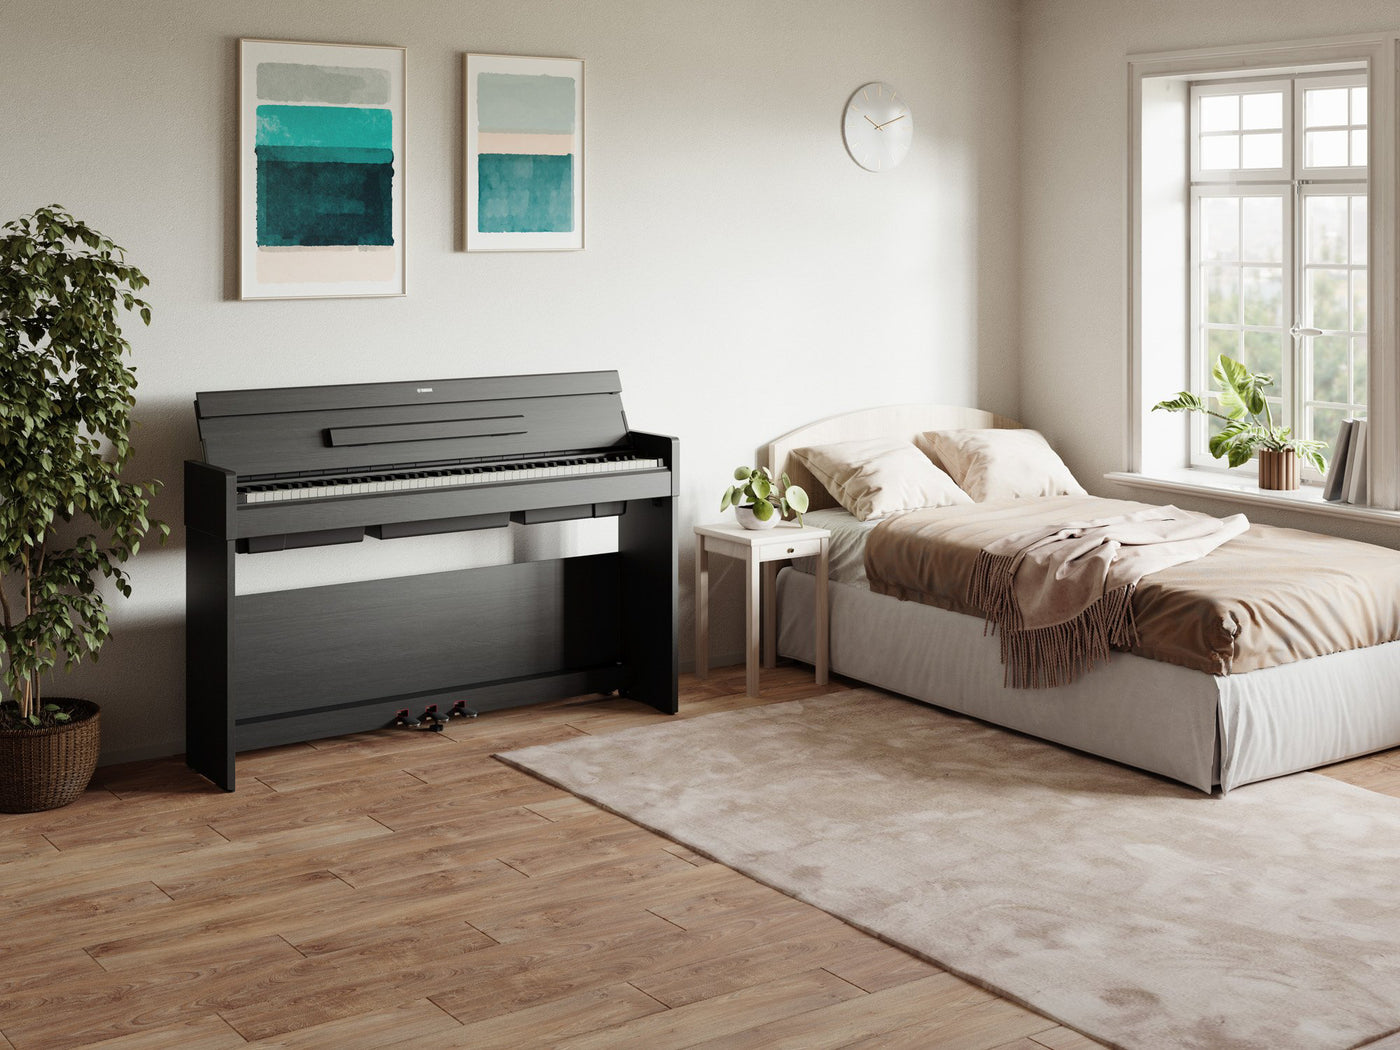 A modern black digital piano situated in a well-lit bedroom with minimalistic decor, wooden flooring, and a plant adding a touch of greenery.